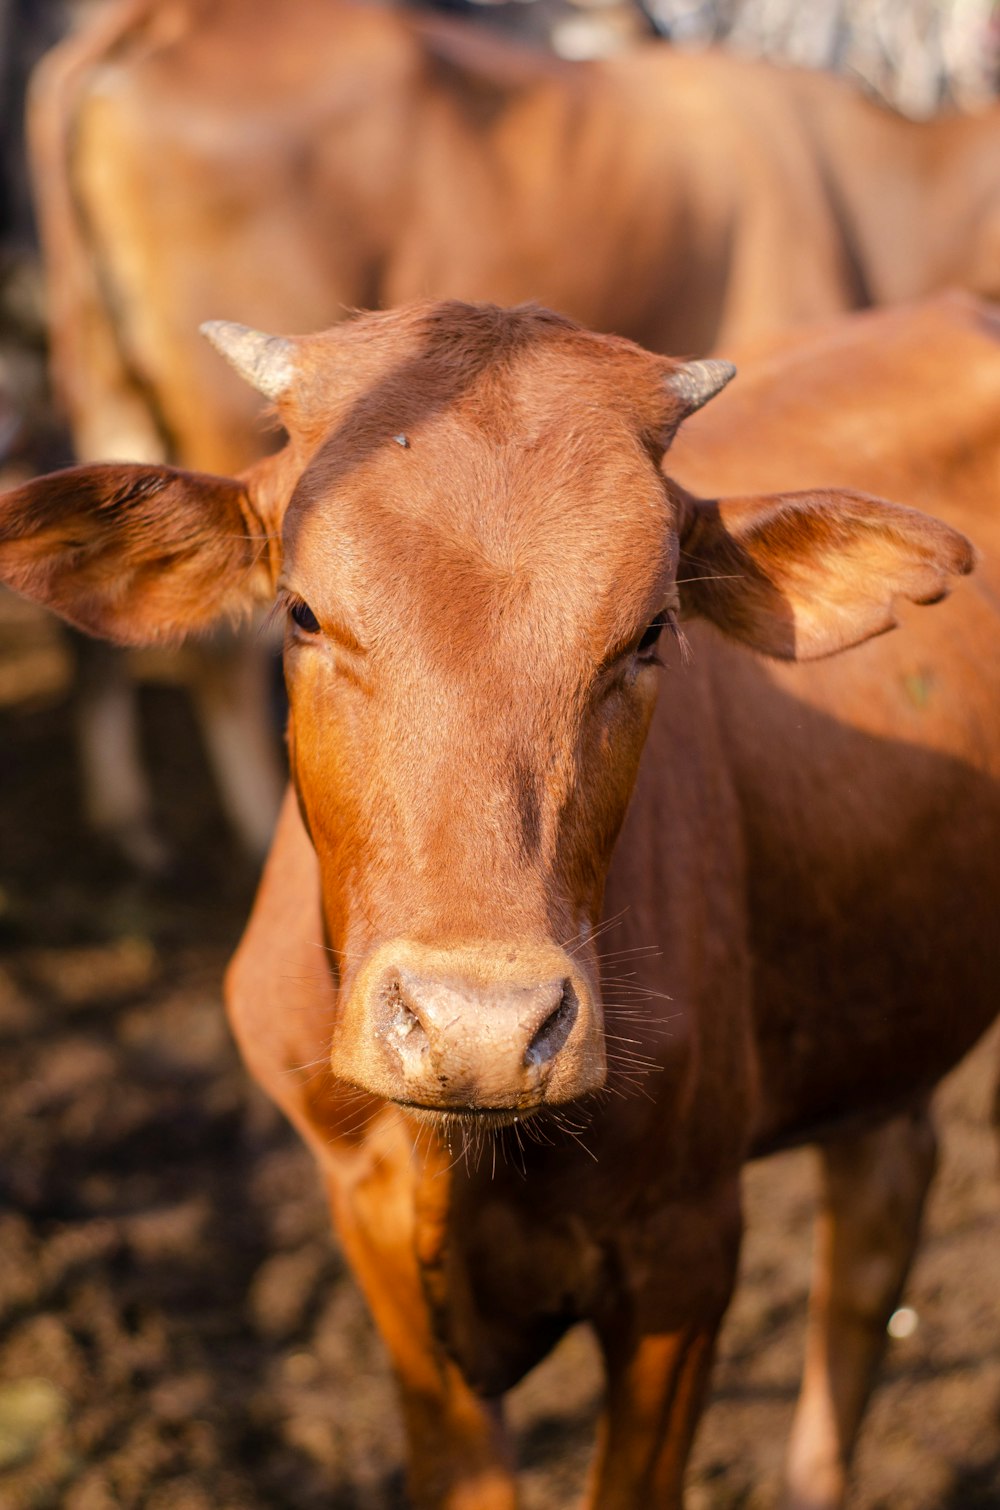 brown cow on brown soil during daytime photo – Free Cattle Image on Unsplash